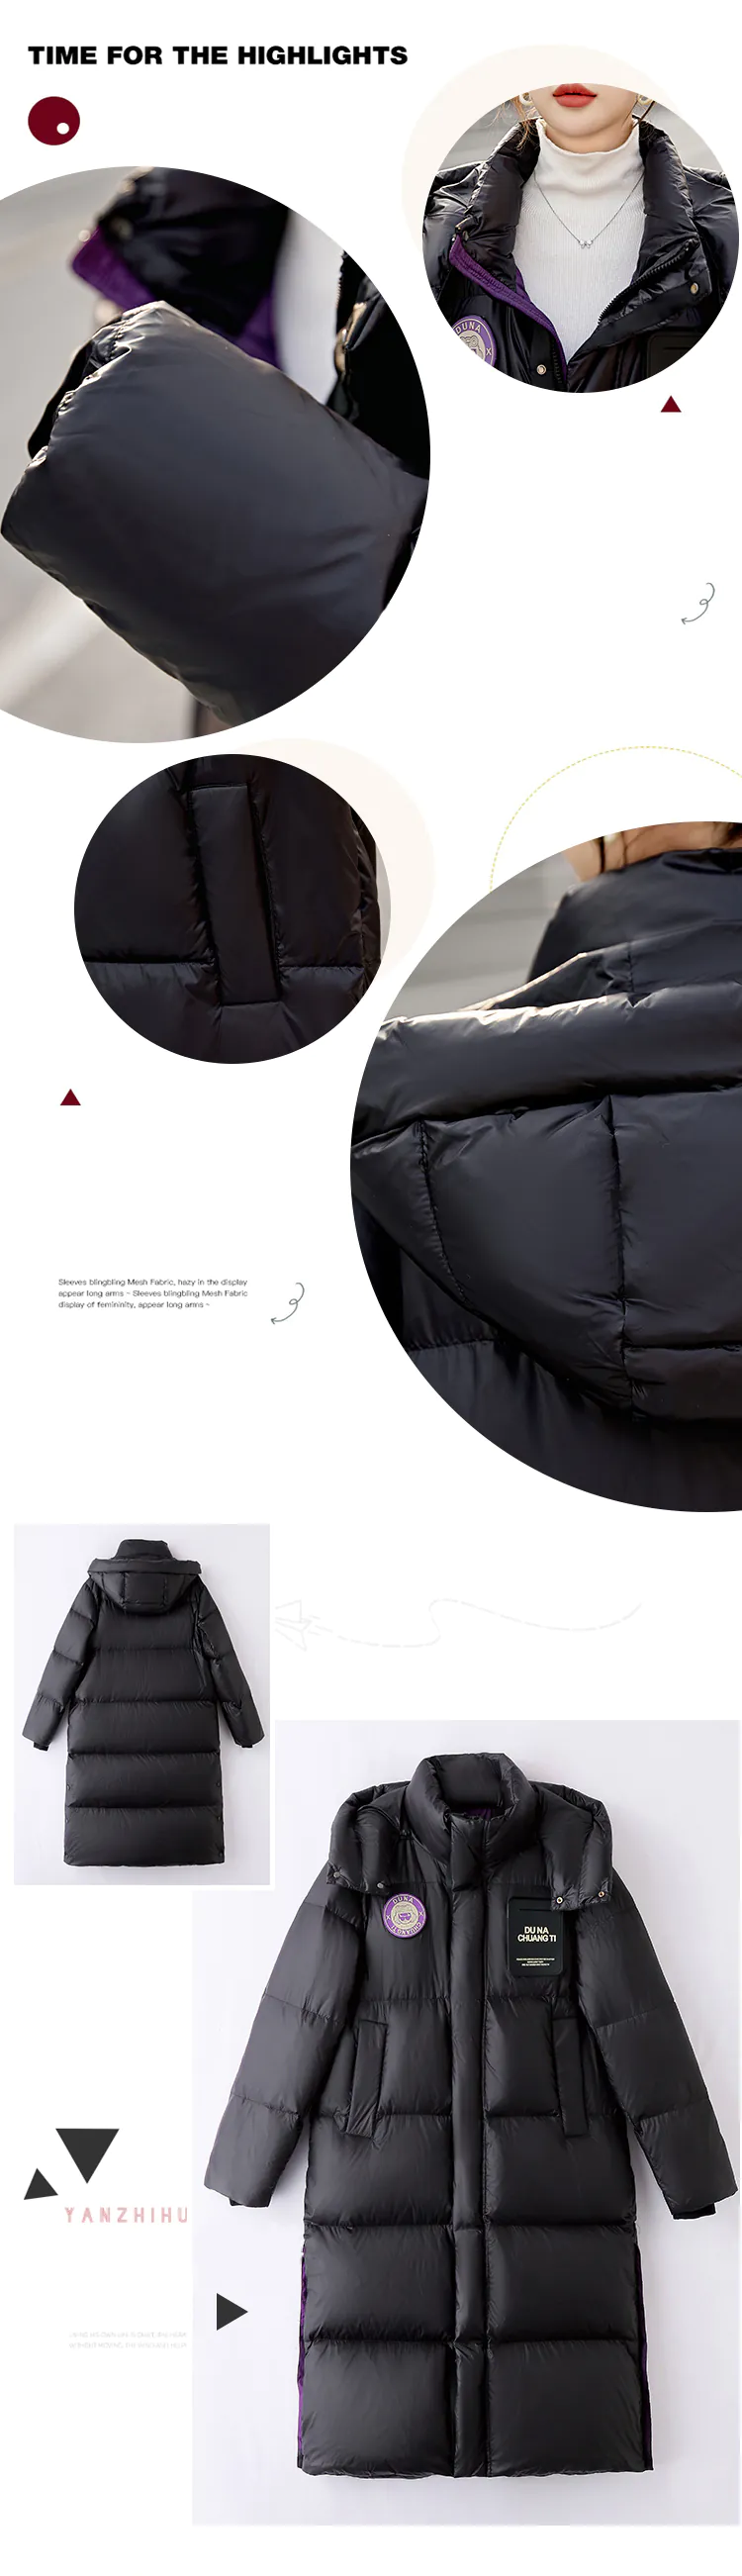 Winter-Thick-Warm-Black-Hooded-White-Duck-Down-Puffer-Jacket-Coat08